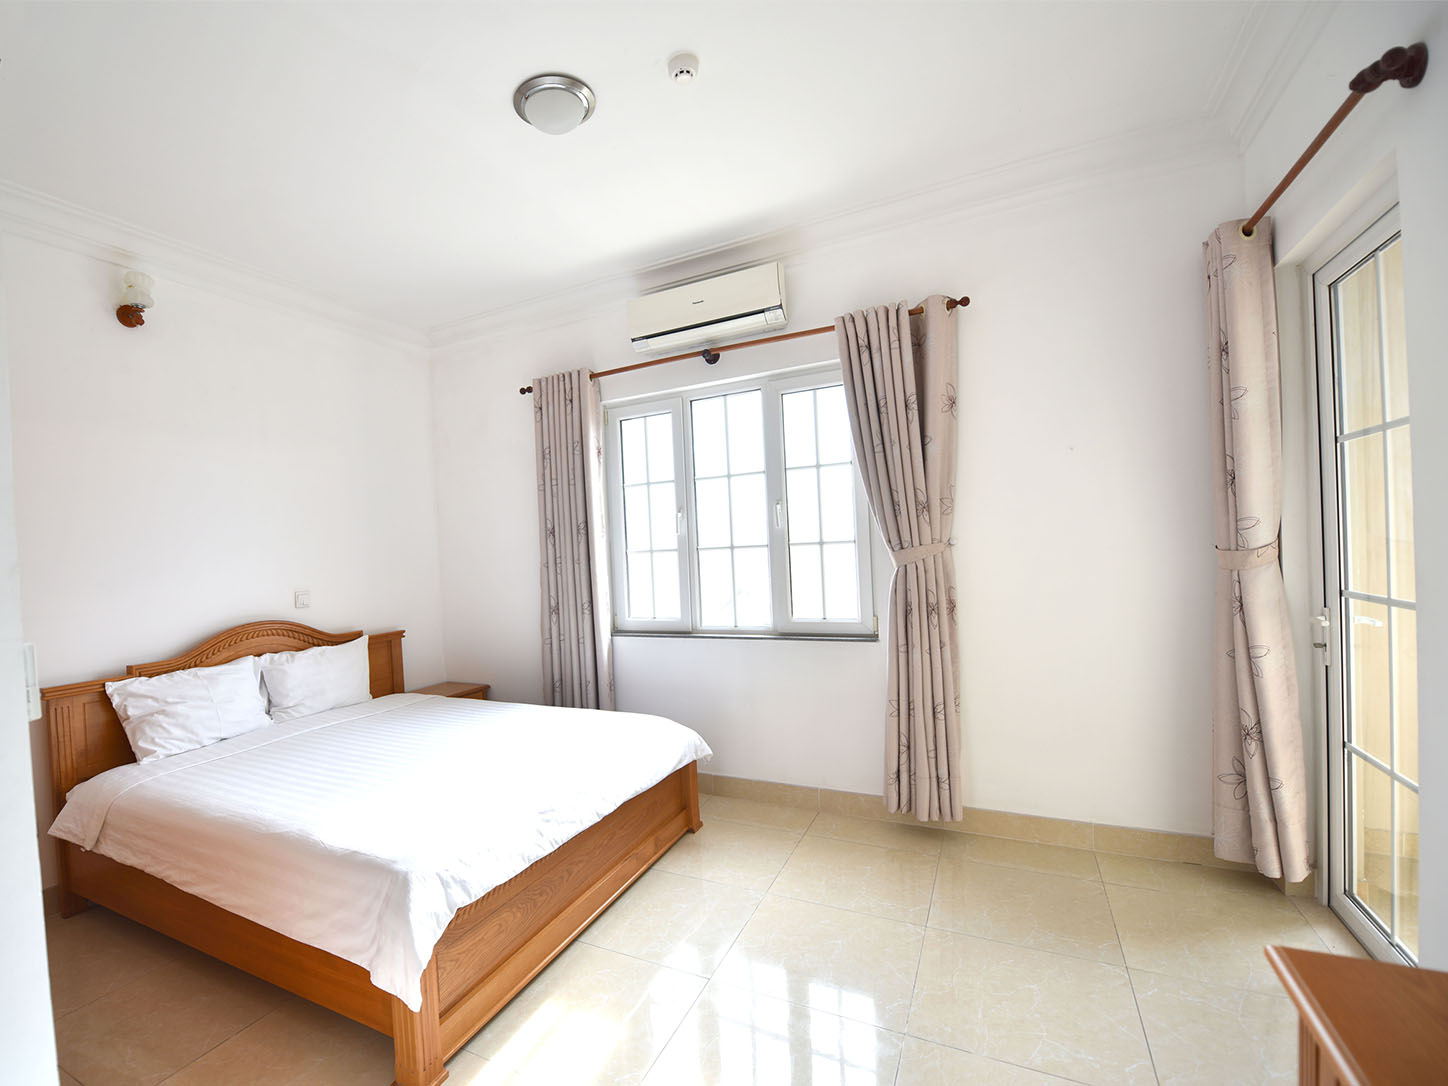 4 Euro Residence Service apartment district 2 ho chi minh